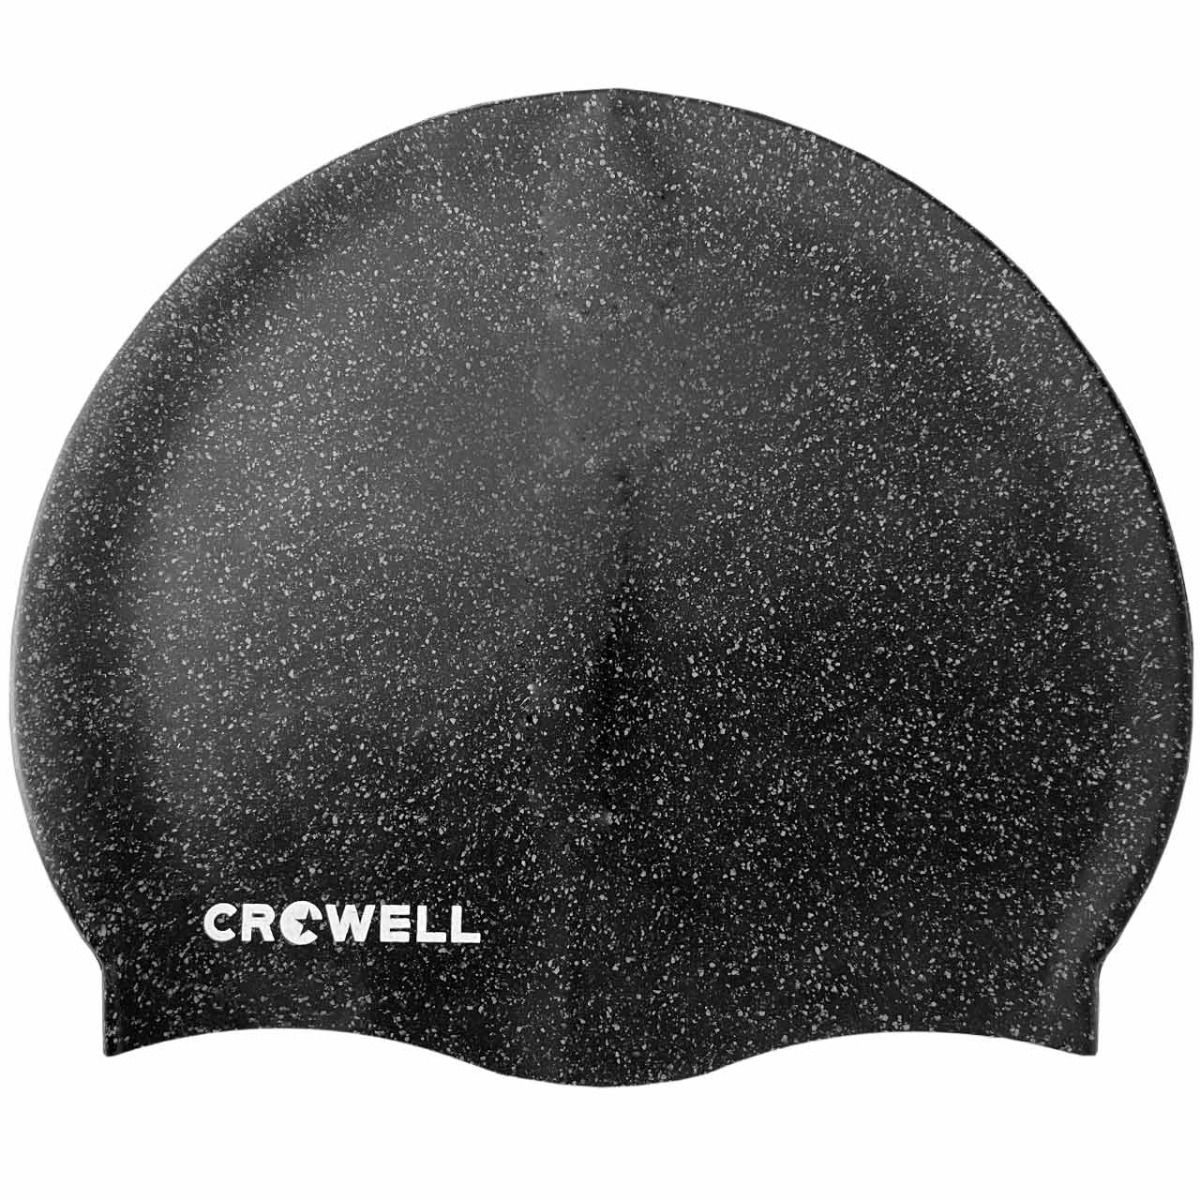 Crowell Badekappe Recycling Pearl 01